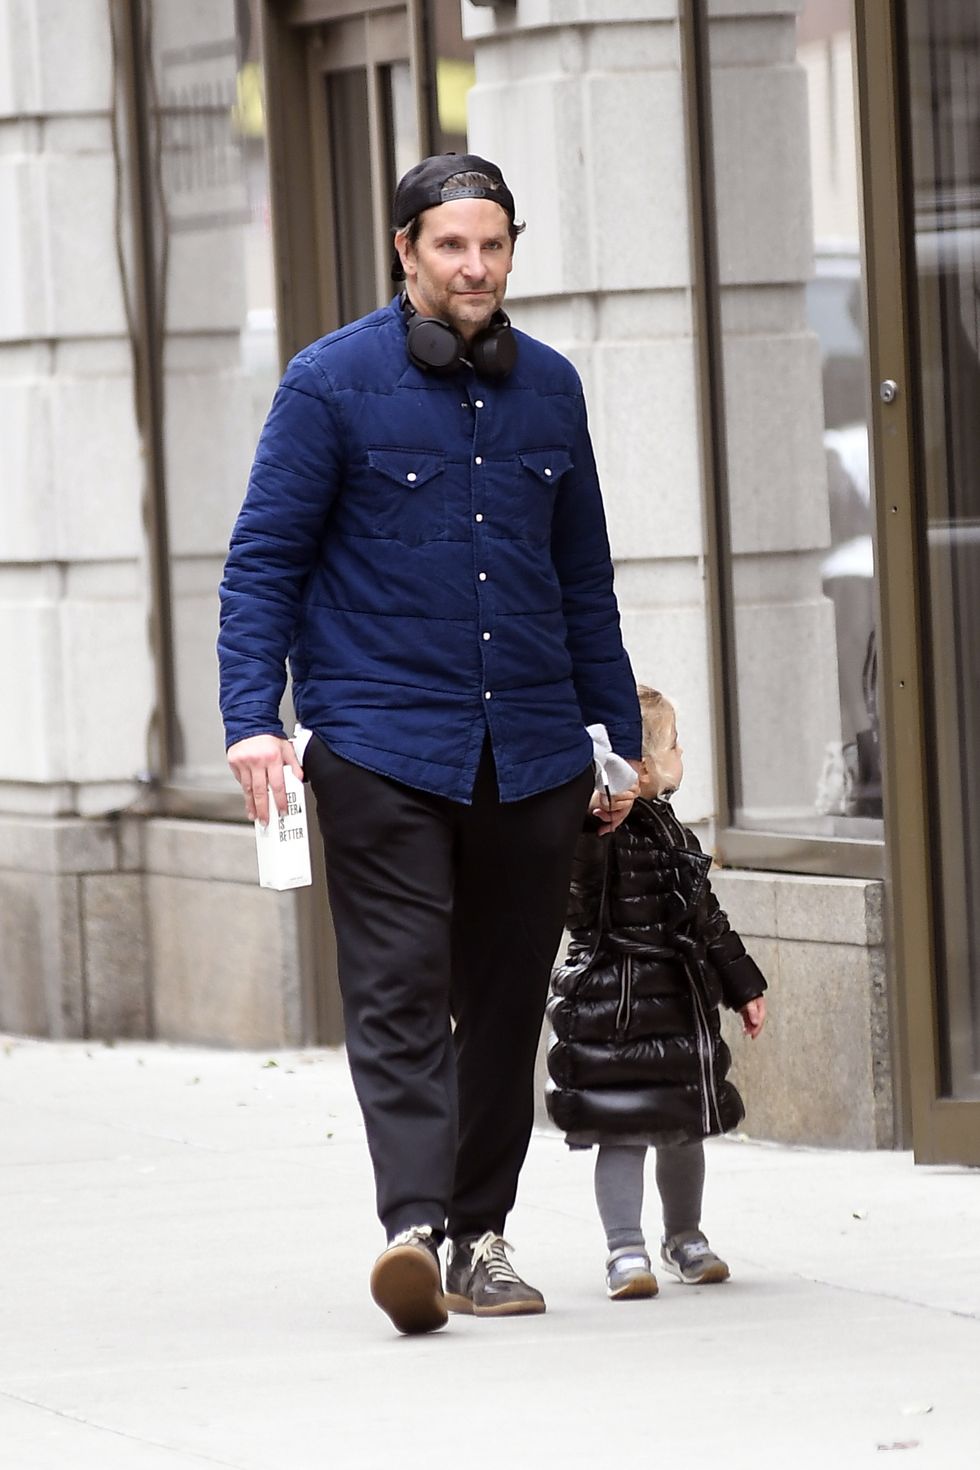 Bradley Cooper in a Madewell Shirt Jacket in March 2020